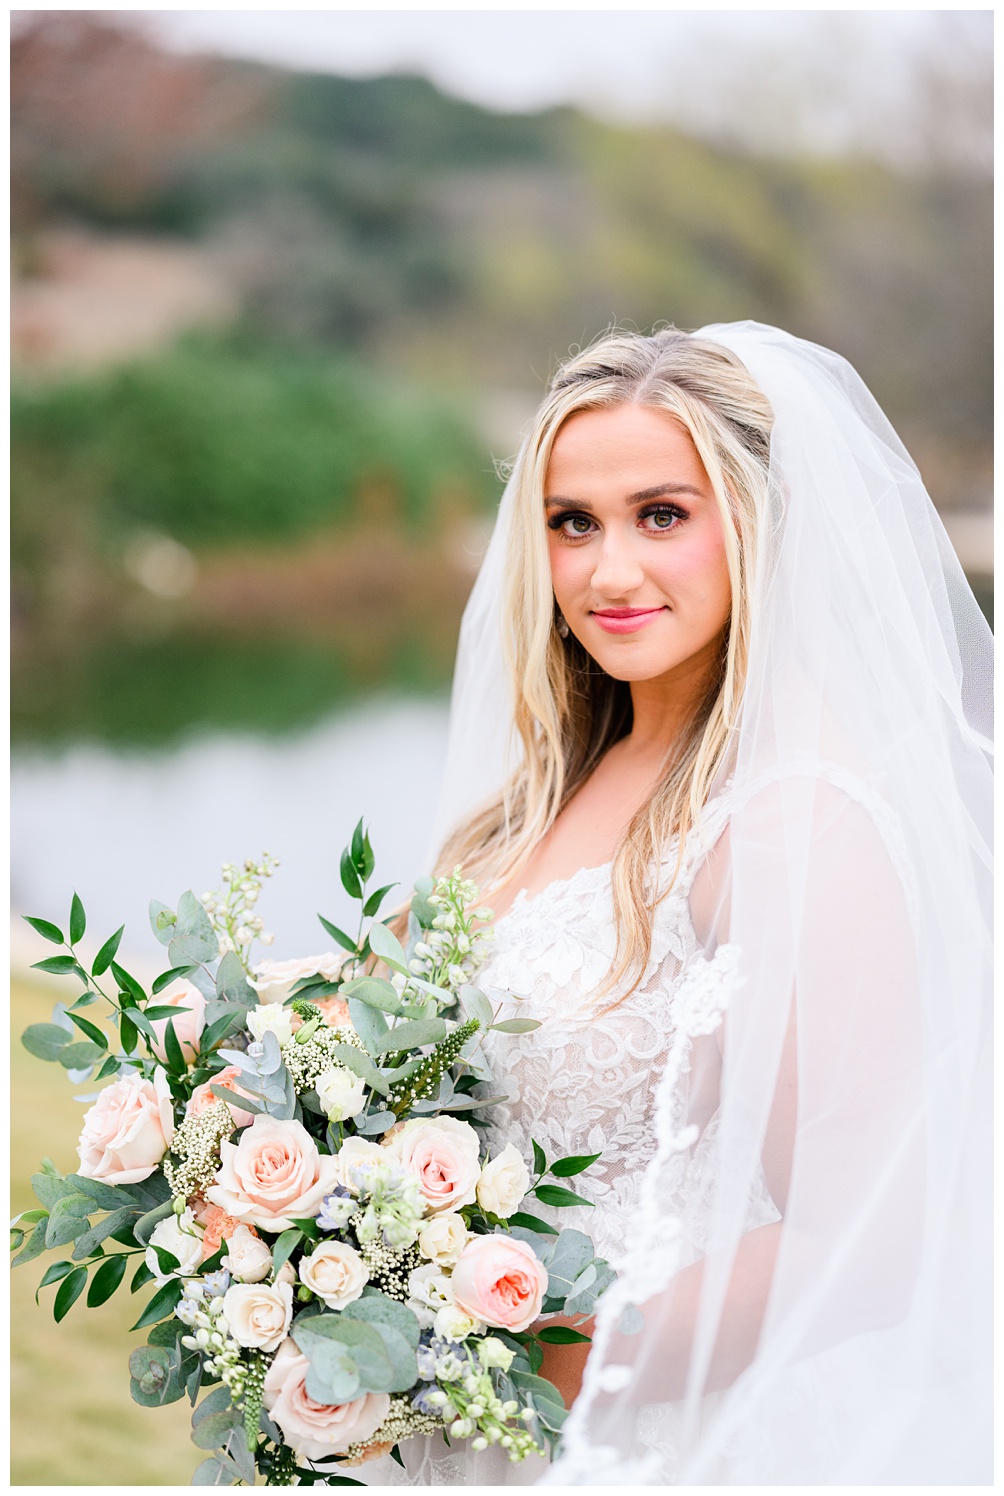 Think Brink Beauty for bridal hair and makeup at The Garey House in Georgetown Texas